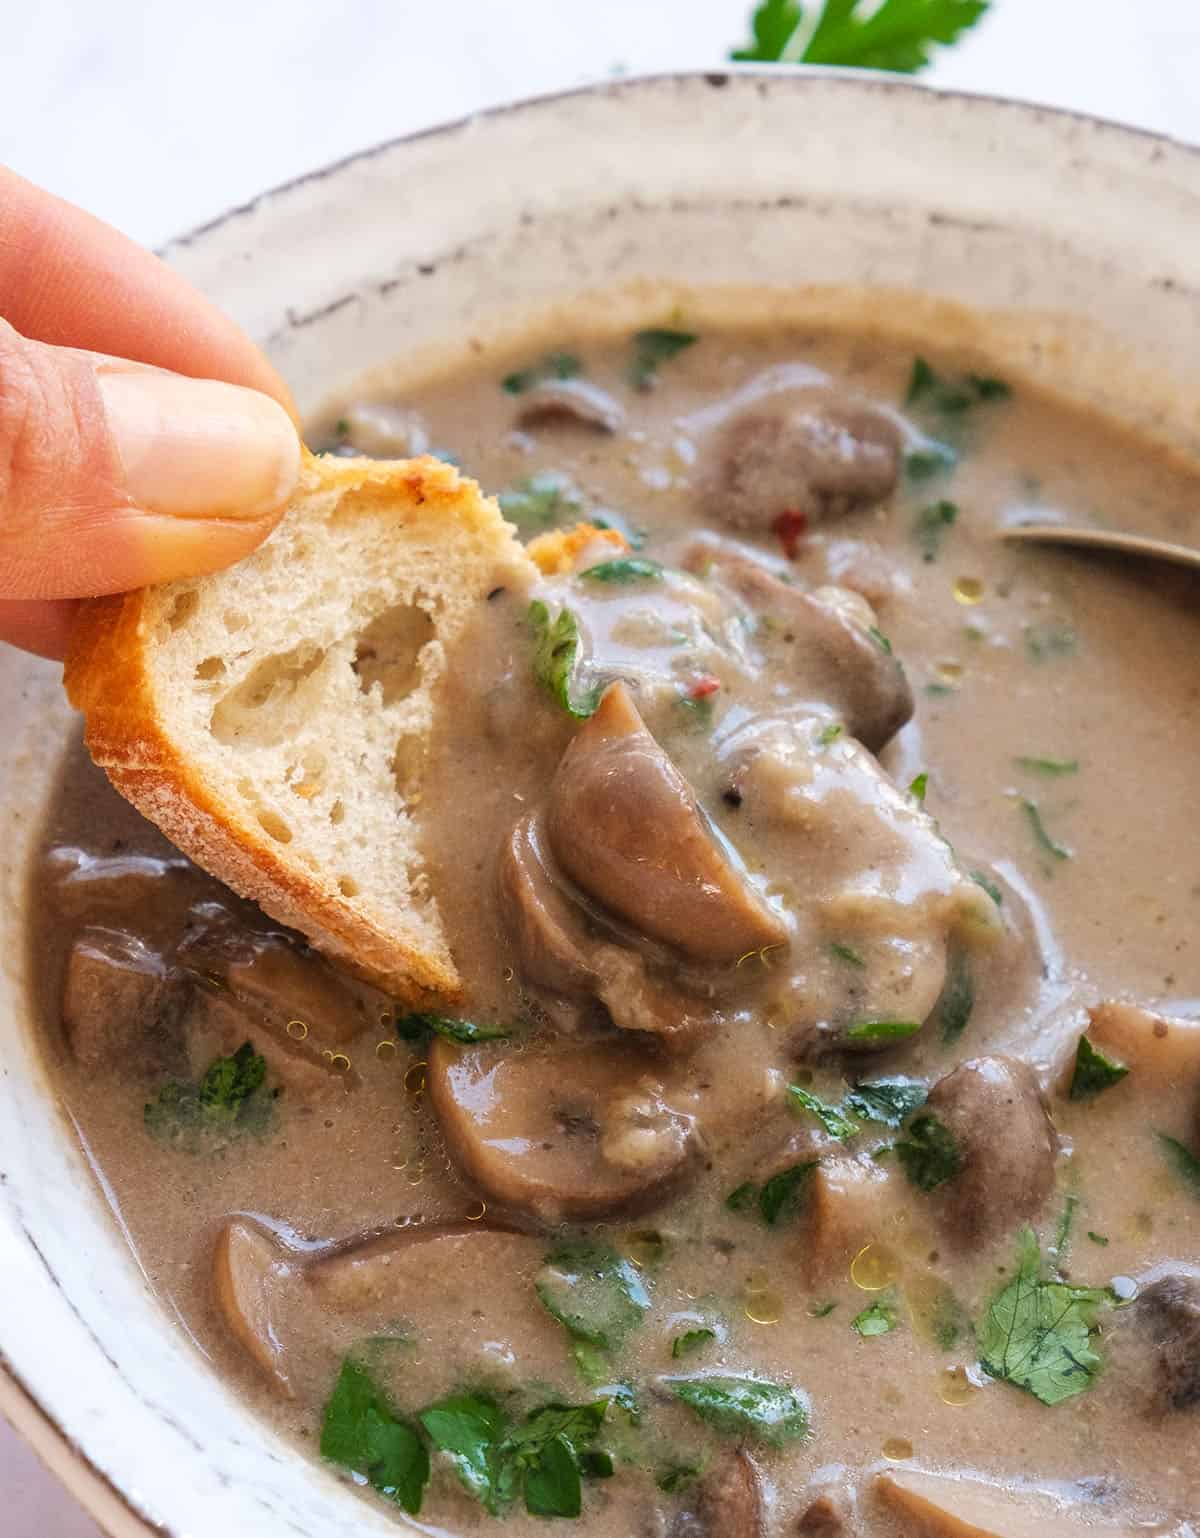 Close-up of a slice of bread dunking in the creamy vegan mushroom soup.